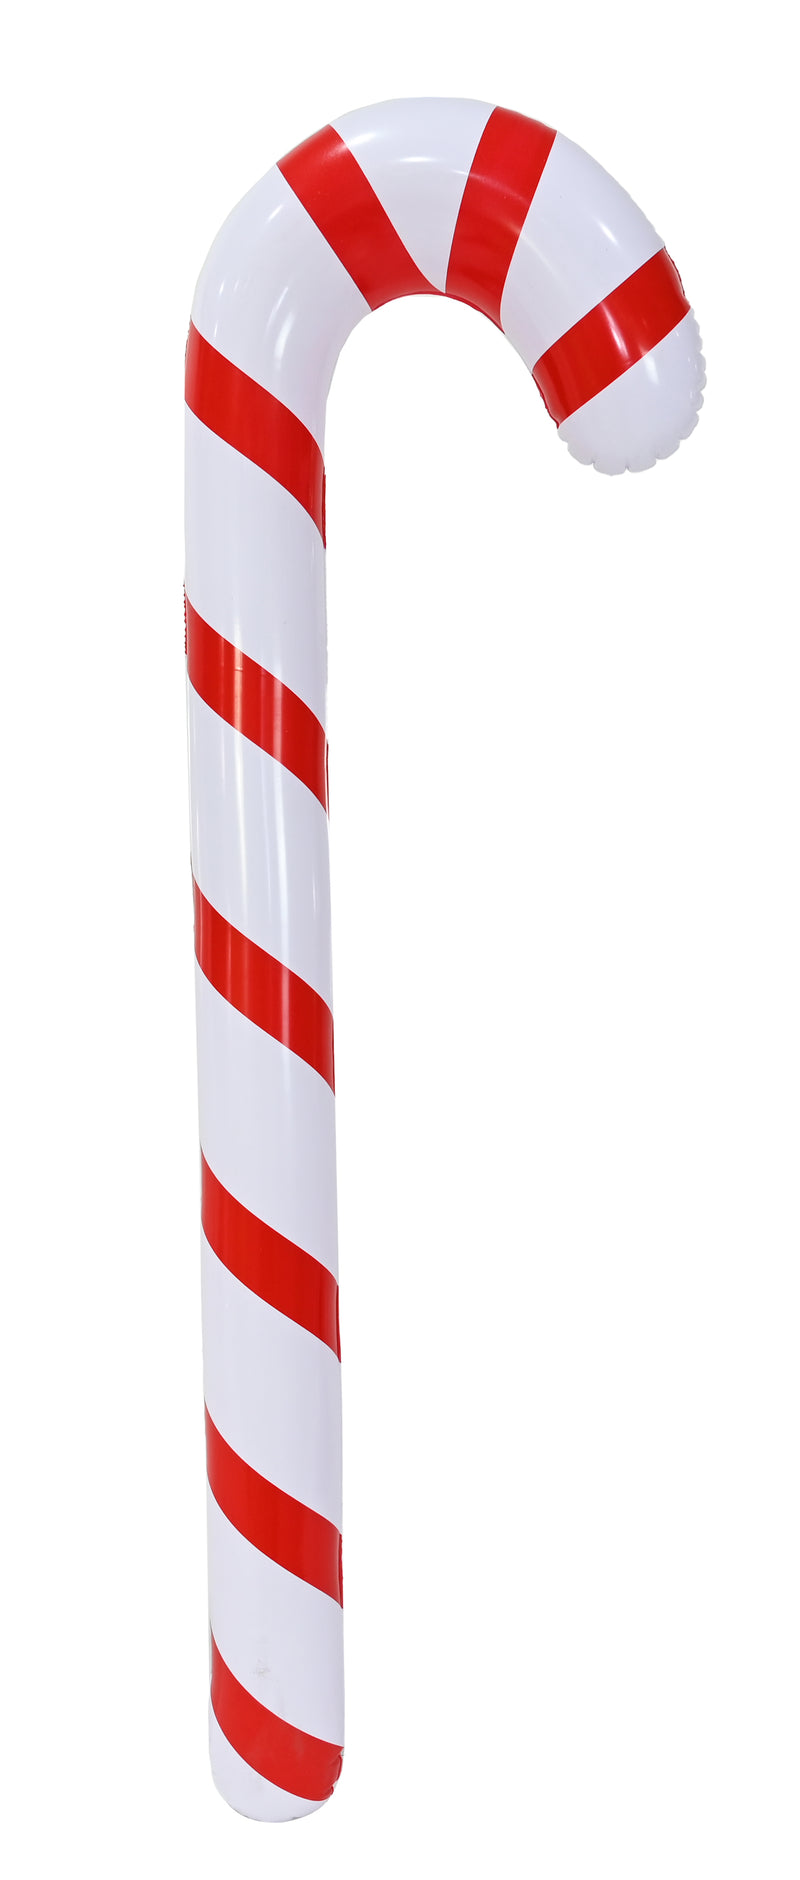 COMING SOON - INFLATABLE CANDY CANE